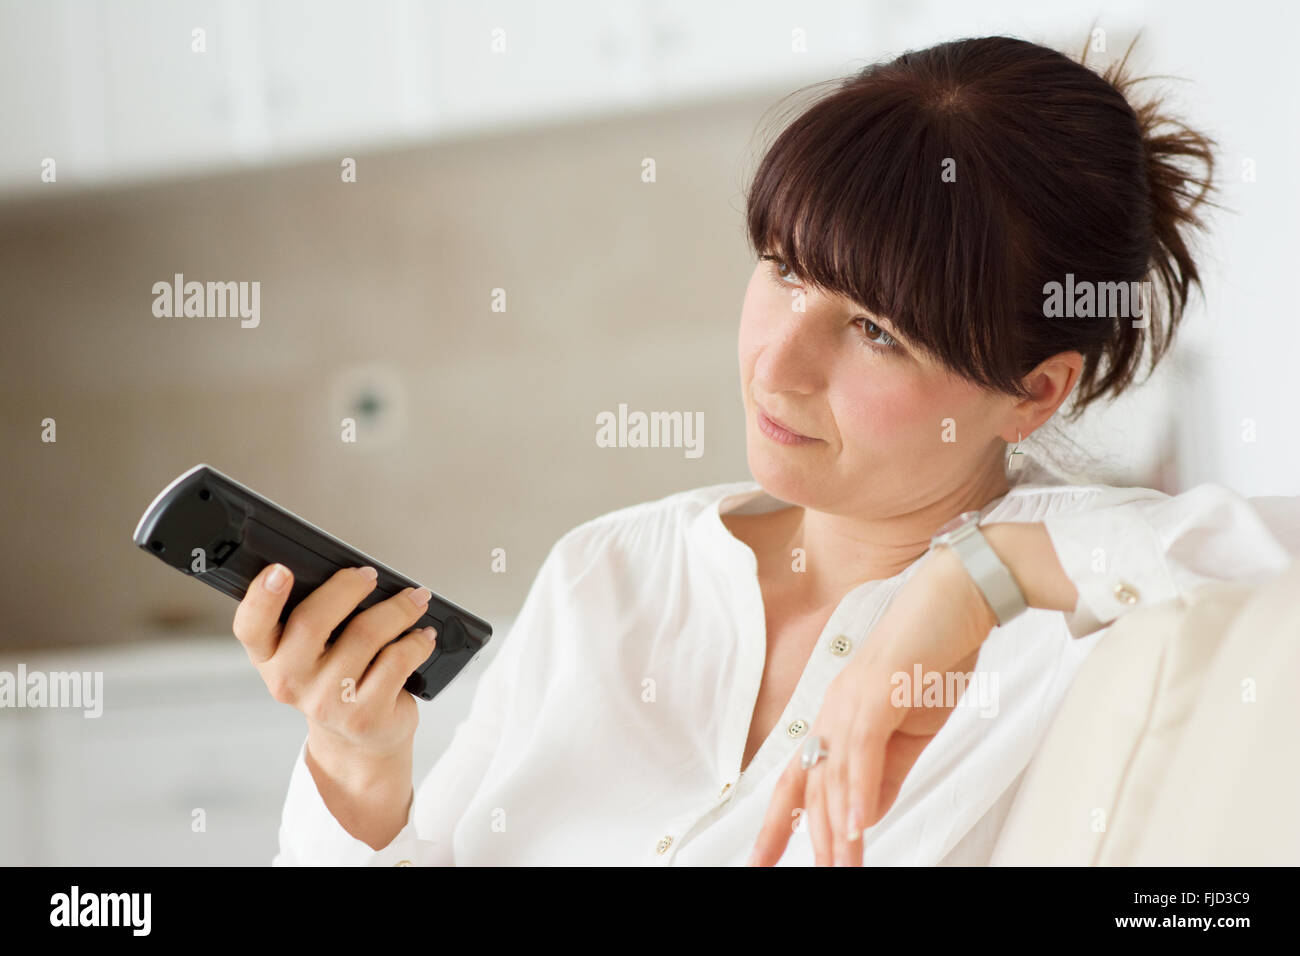 Woman in home watching television and changing channels with remote control Stock Photo